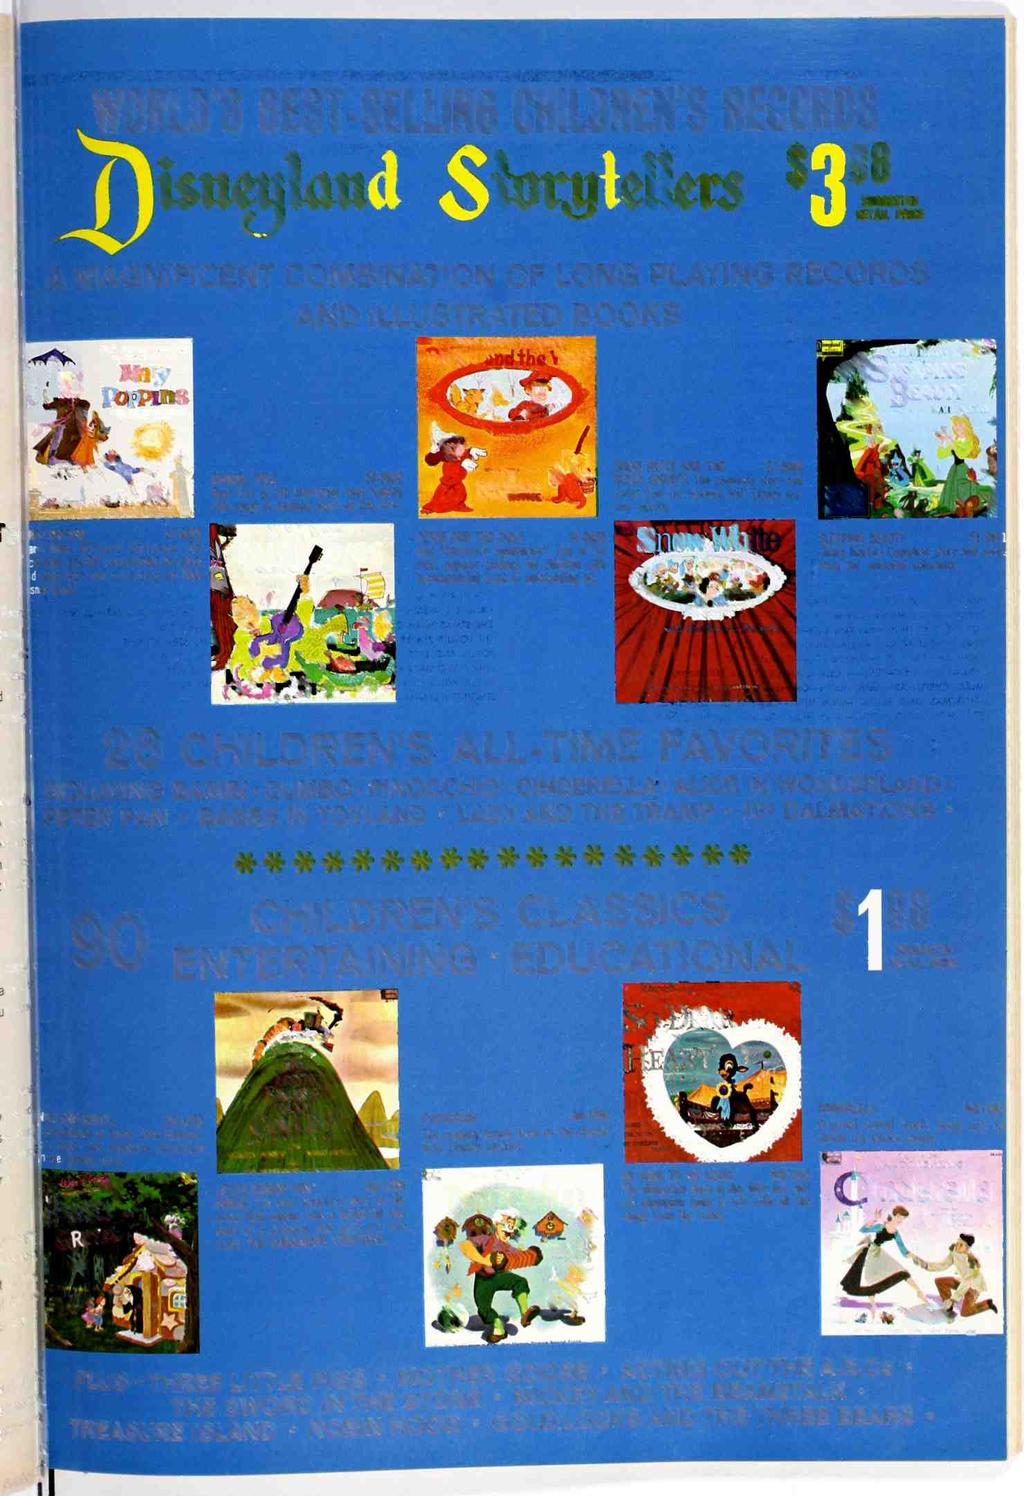 WORLD'S BEST-SELLING CHILDREN'S RECORDS A MAGNIFICENT COMBINATION OF LONG PLAYING RECORDS AND ILLUSTRATED BOOKS Welt Disney presents WC.) 'SUN.11/1420,1.1111.1141 WALT =An" PEE=EUTS (IIJJJ hlll!